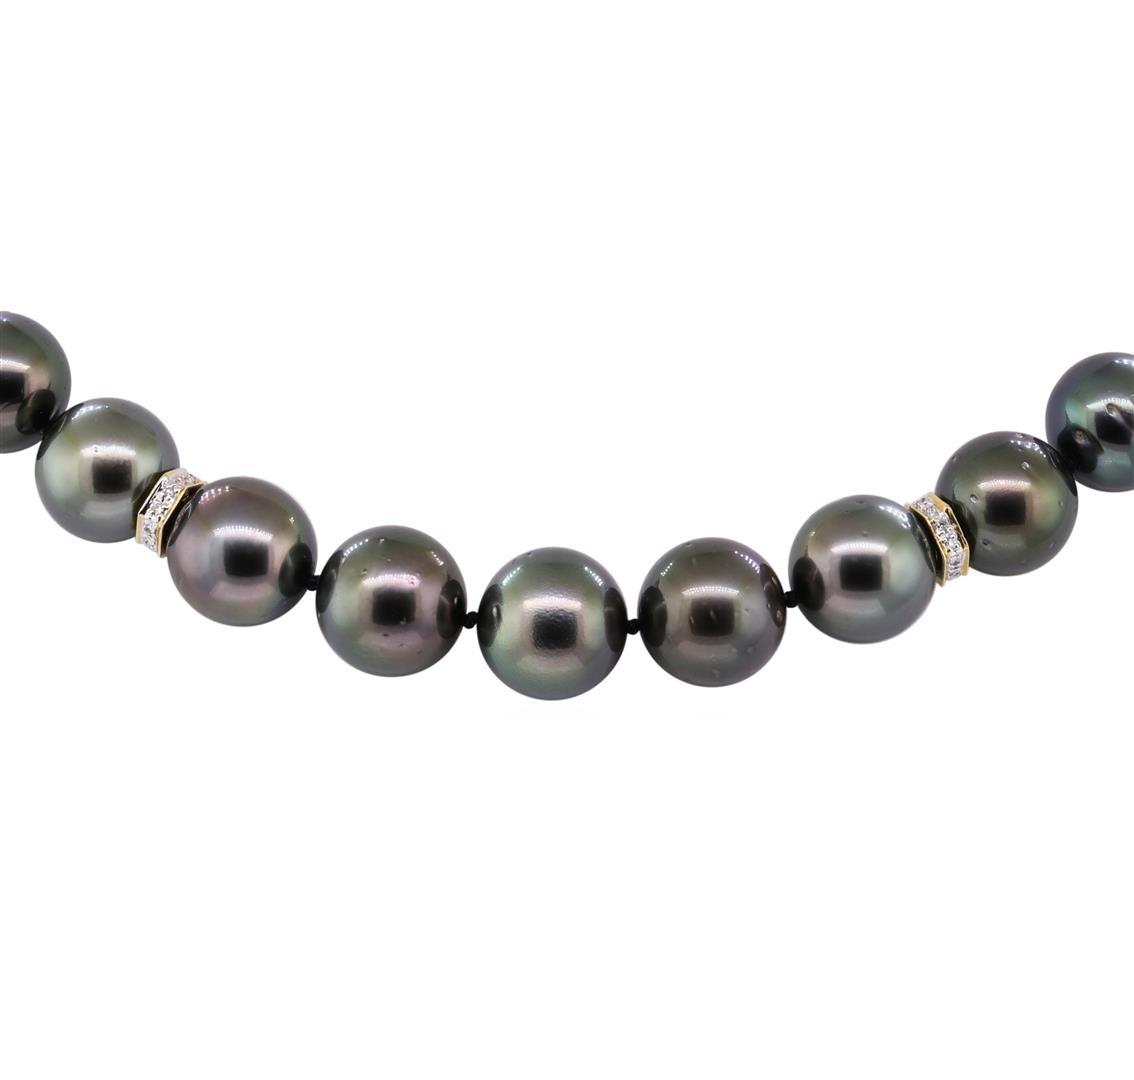 0.75 ctw Diamond and Tahitian Pearl Necklace - 14KT Yellow Gold